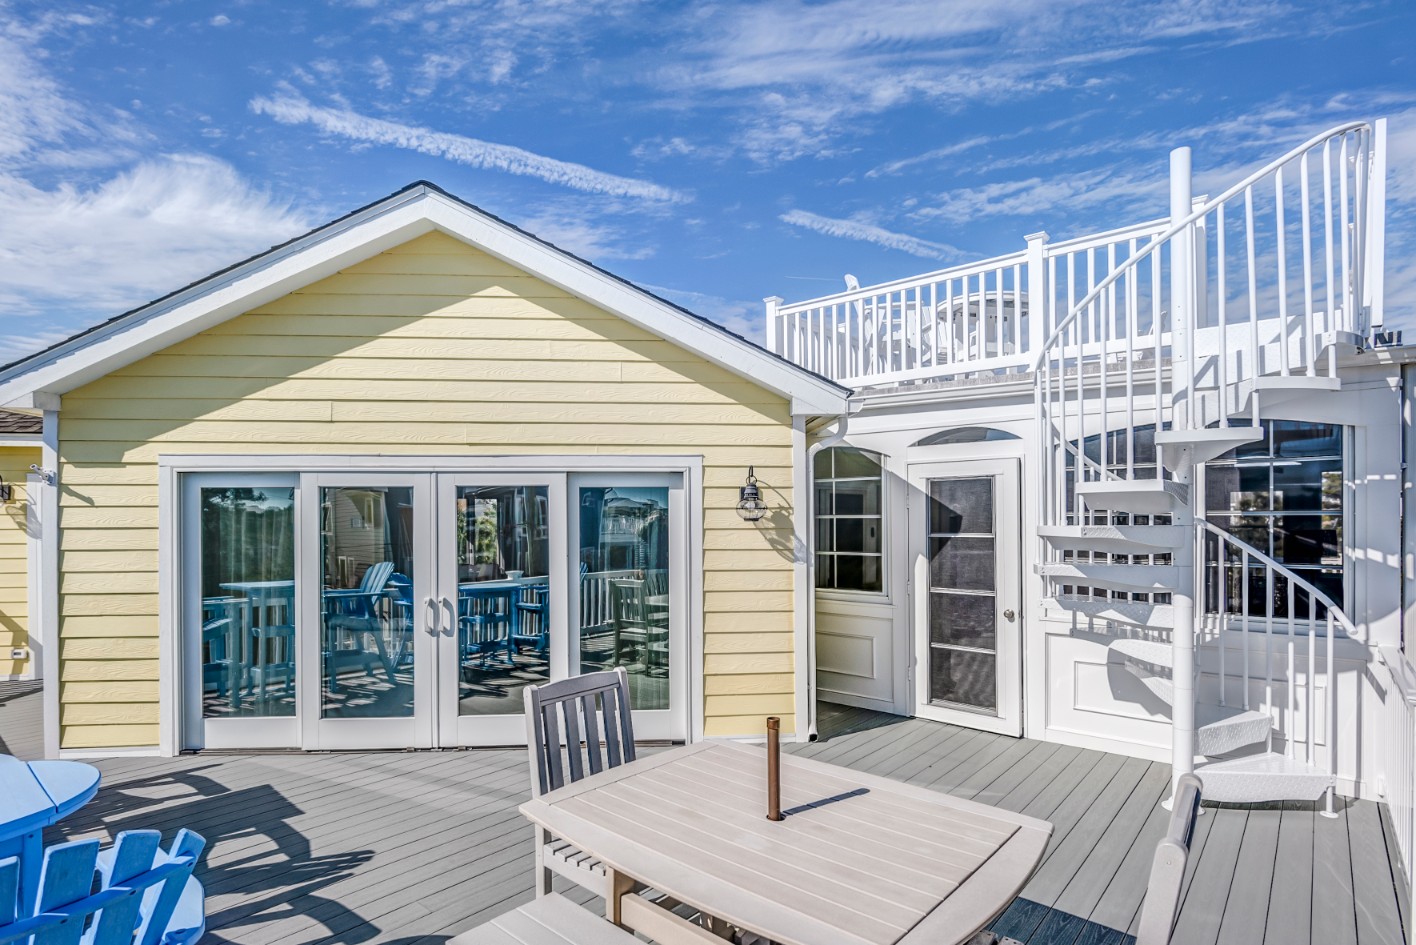 Indian Street Exterior in Bethany Beach DE - Second Level Deck with Table, Chairs and Spiral Staircase